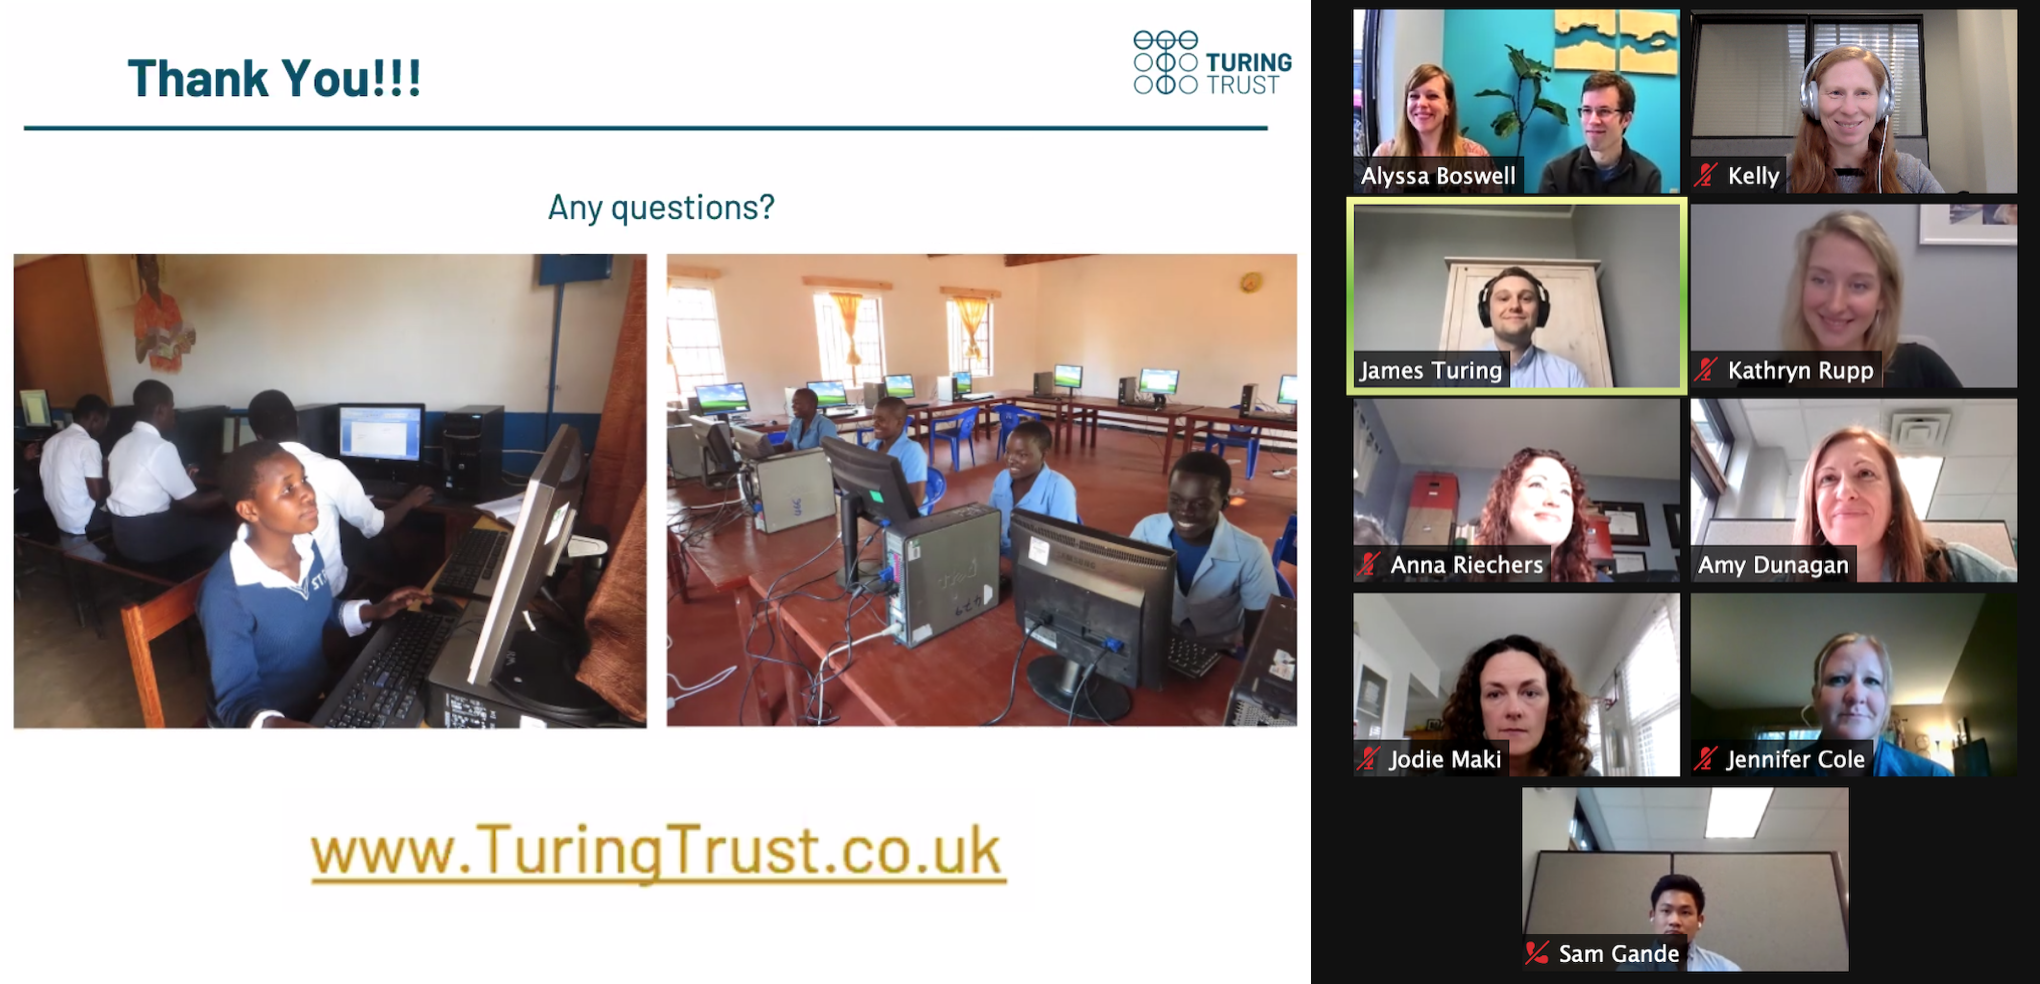 James Turing from the Turing Trust presents to the Upper Story team